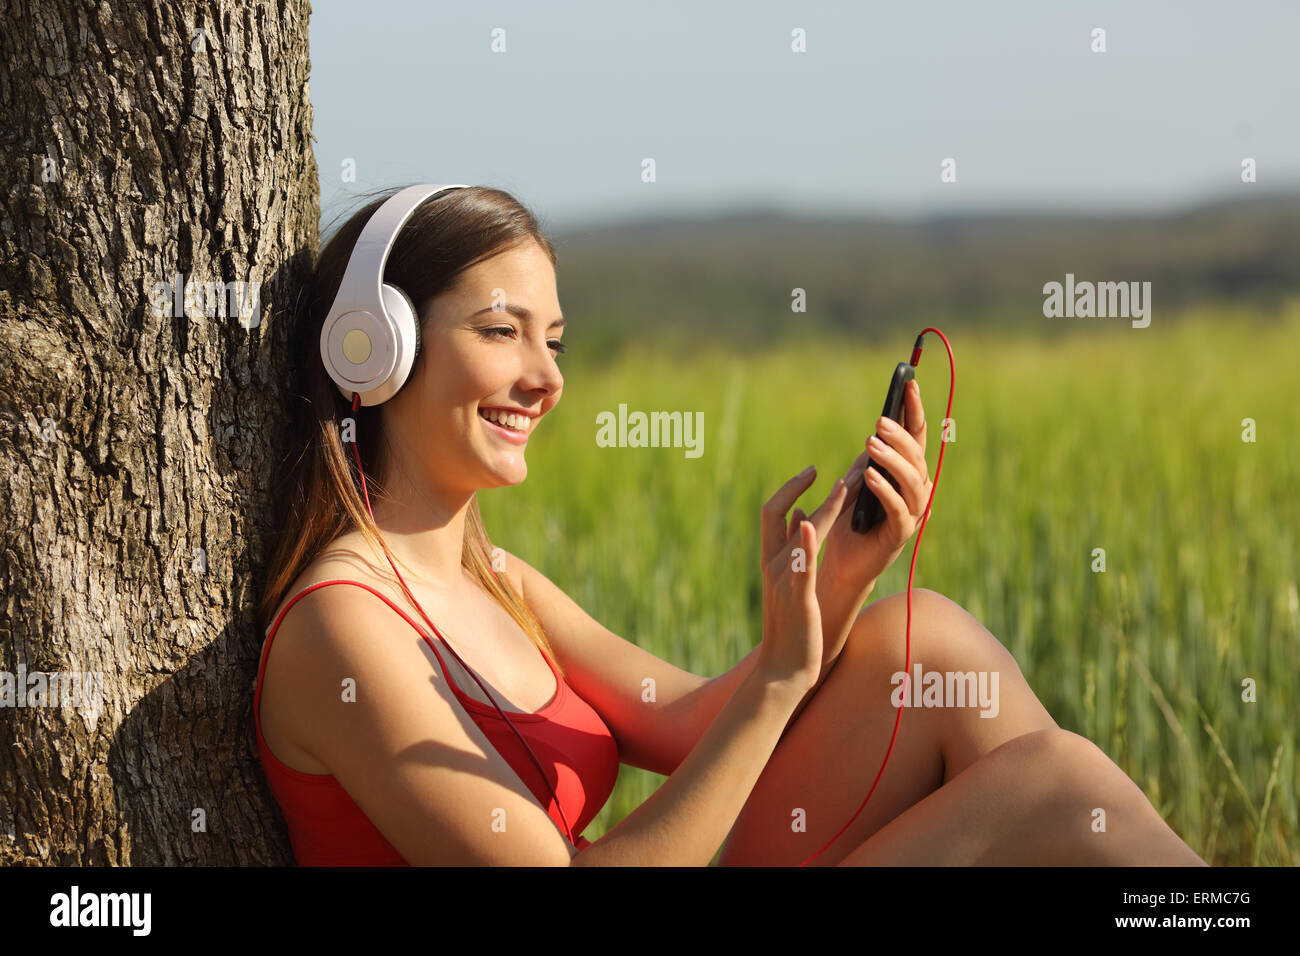 Girl listening to the music and downloading songs sitting in a green field wearing a red shirt Stock Photo